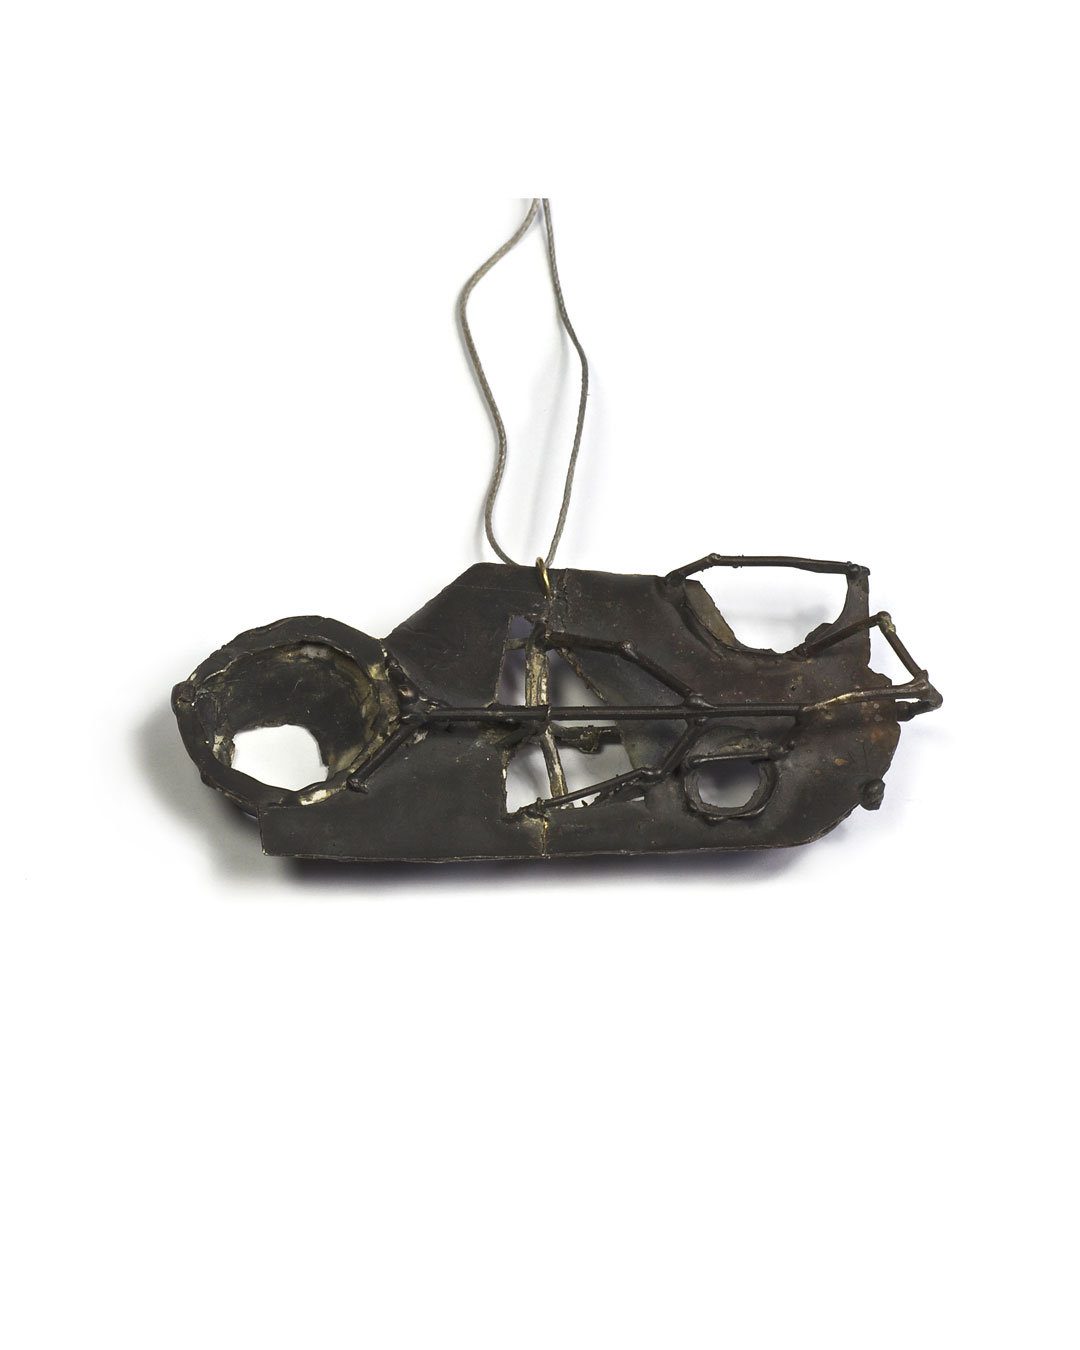 Andrea Wippermann, Haus (House), 2002, pendant; silver, gold, 37 x 82 x 16 mm, €850